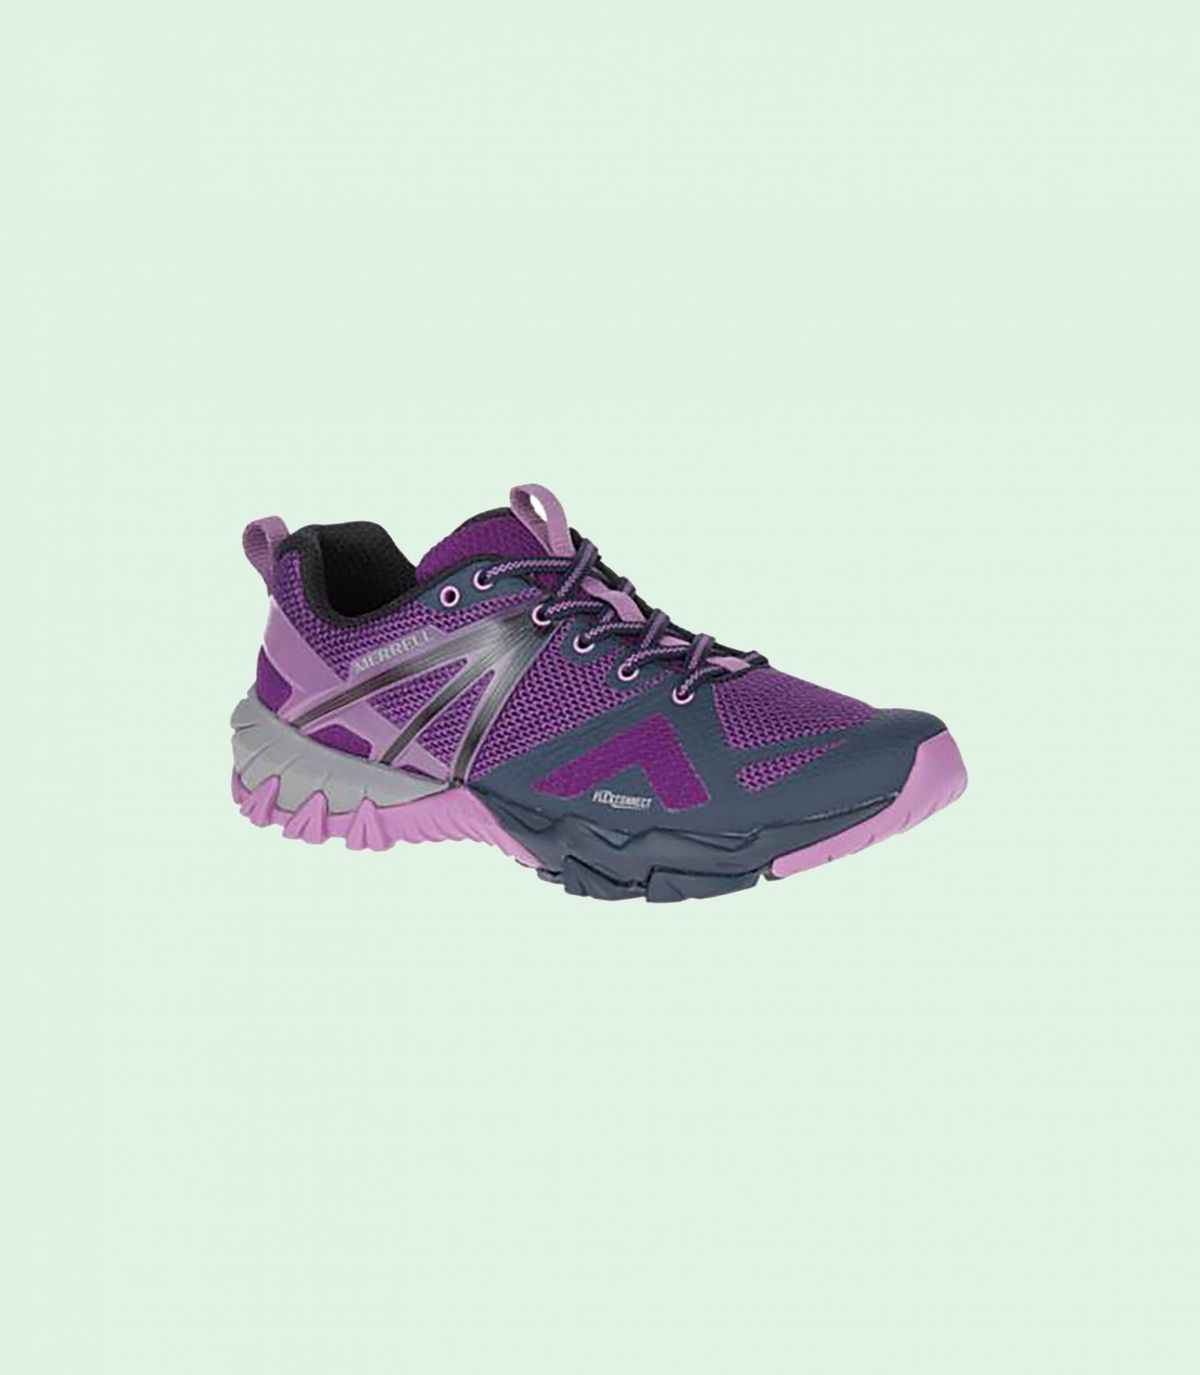 merrell-hiking-shoes-labor-day-sale